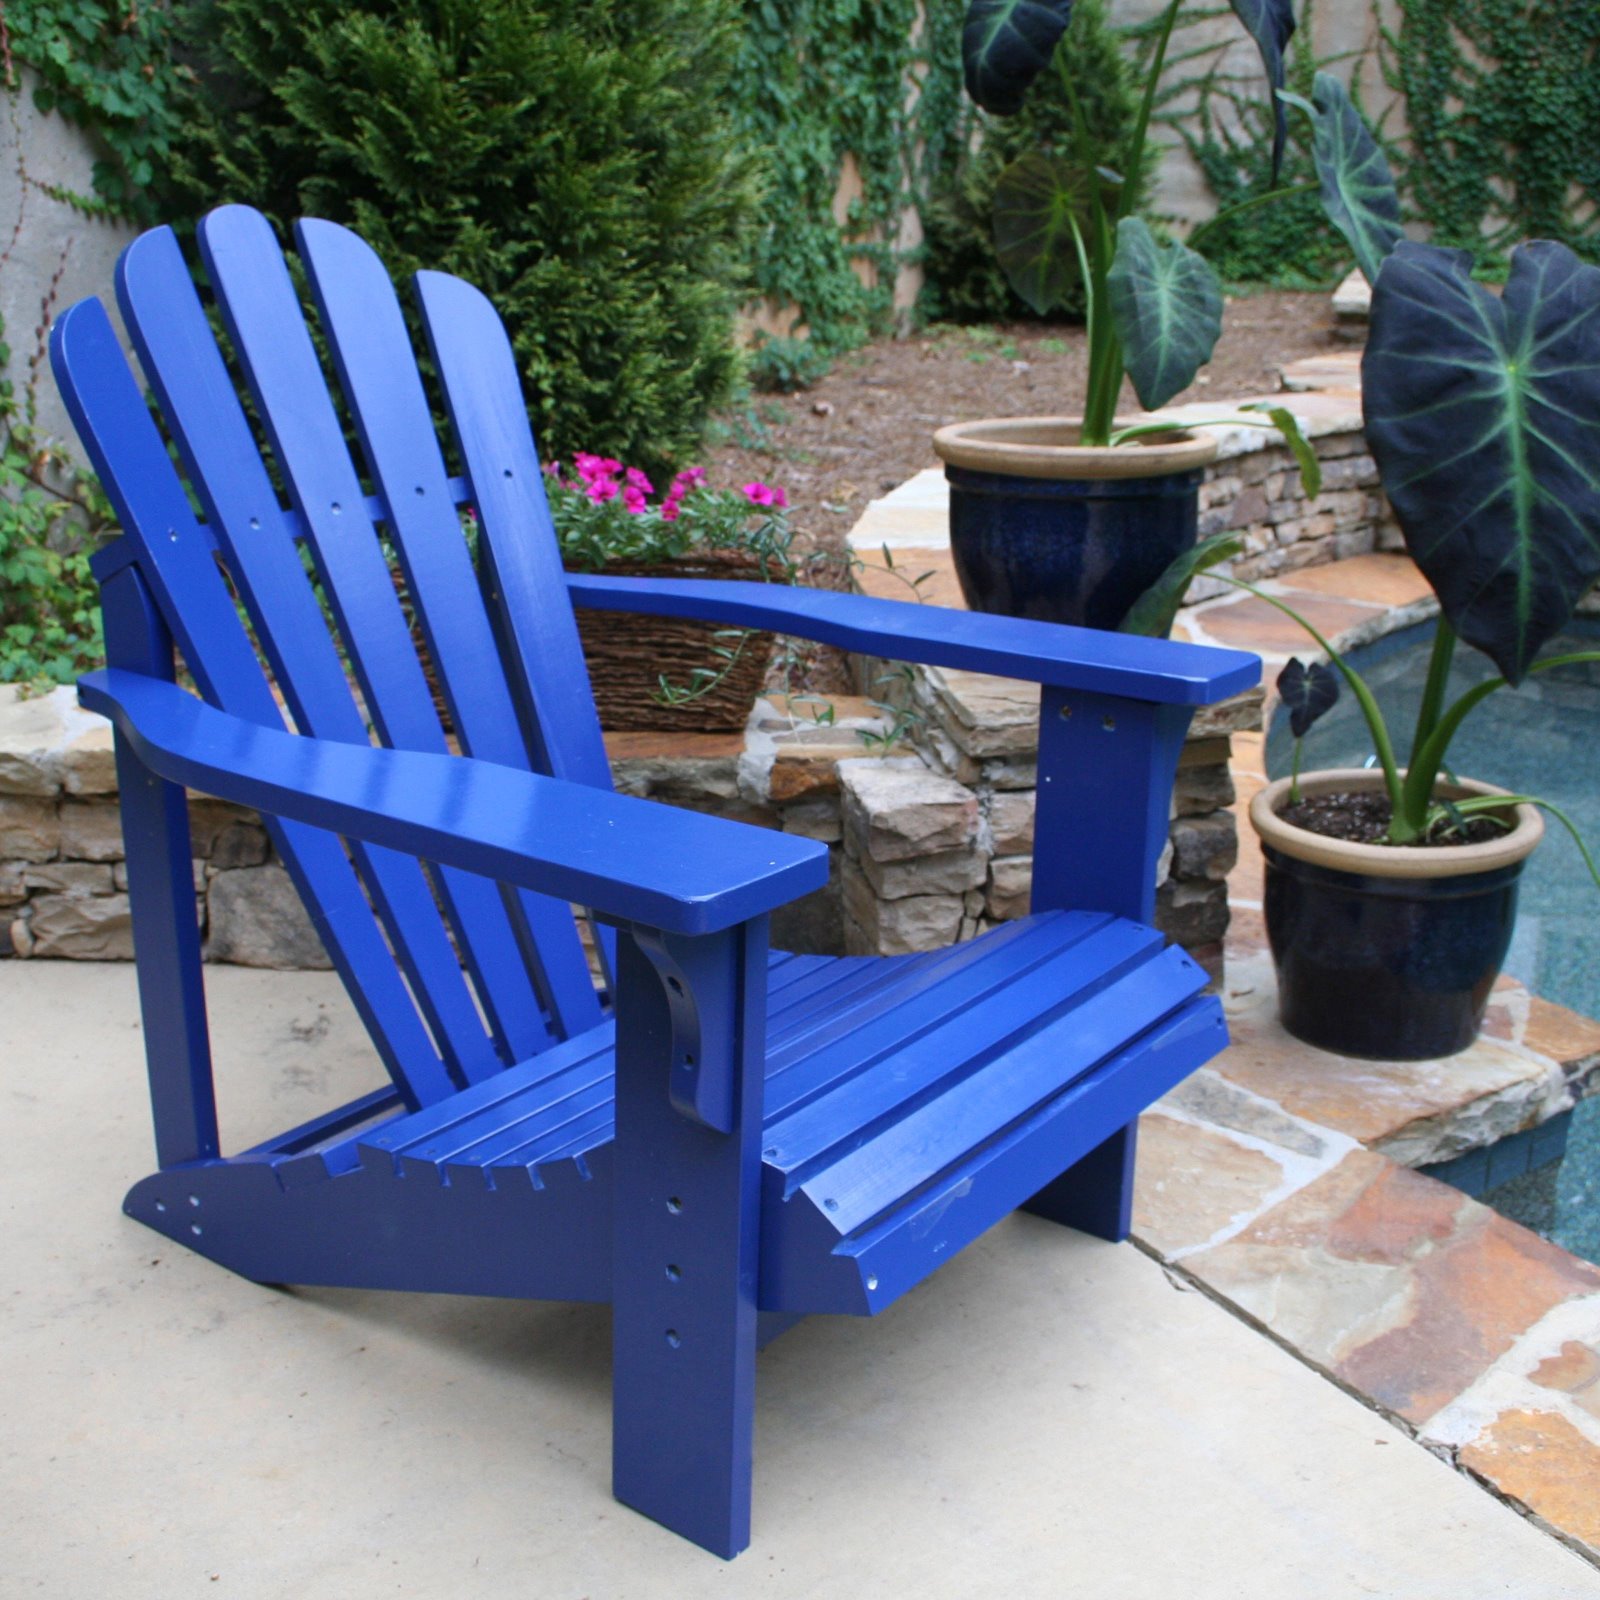 Relaxing in Style: The Adirondack Chair